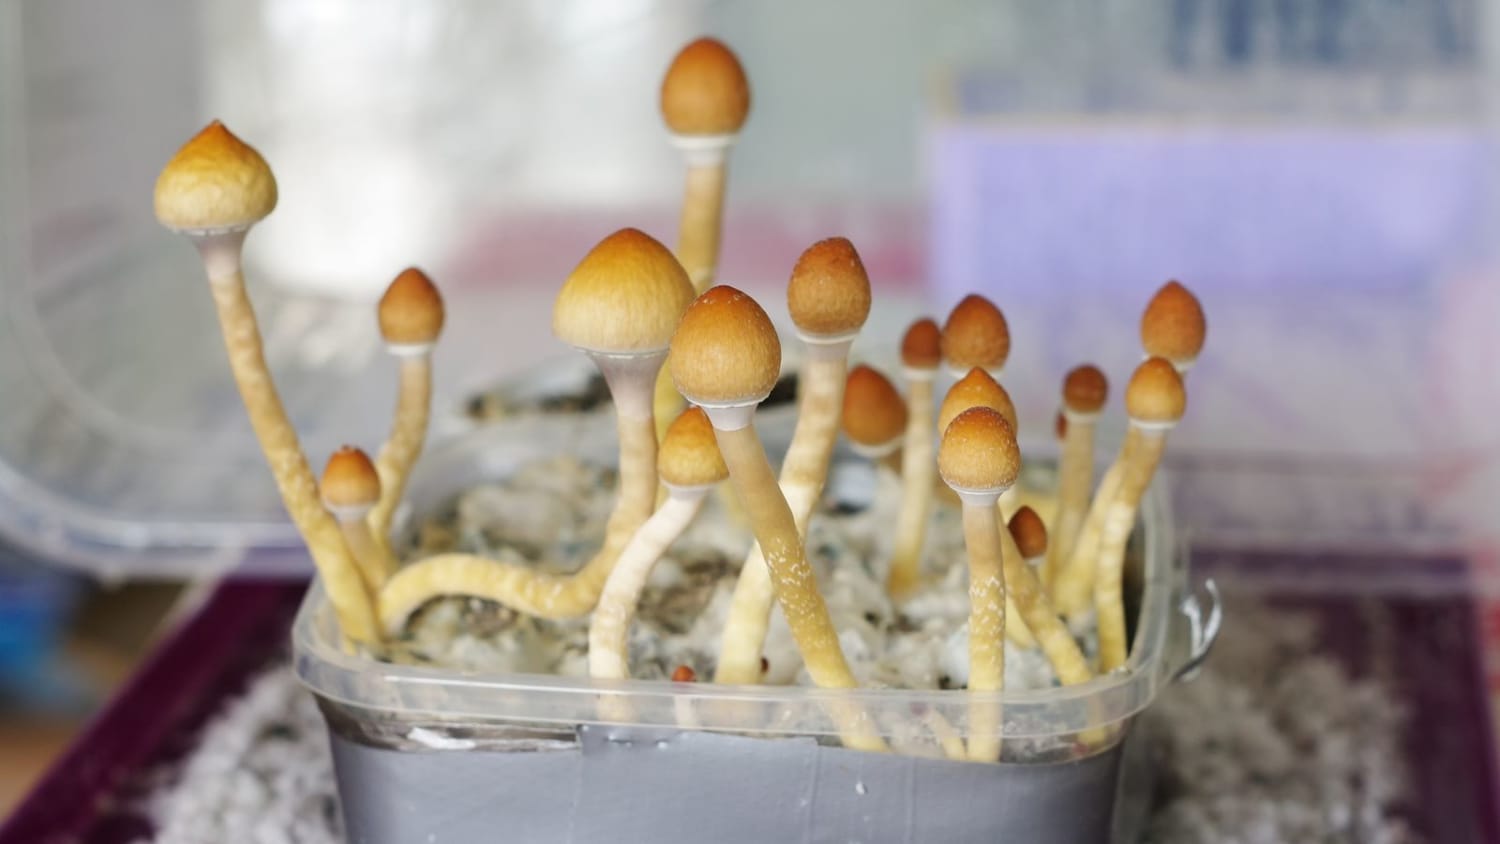 Terminally ill Canadians win right to use magic mushrooms for end-of-life stress